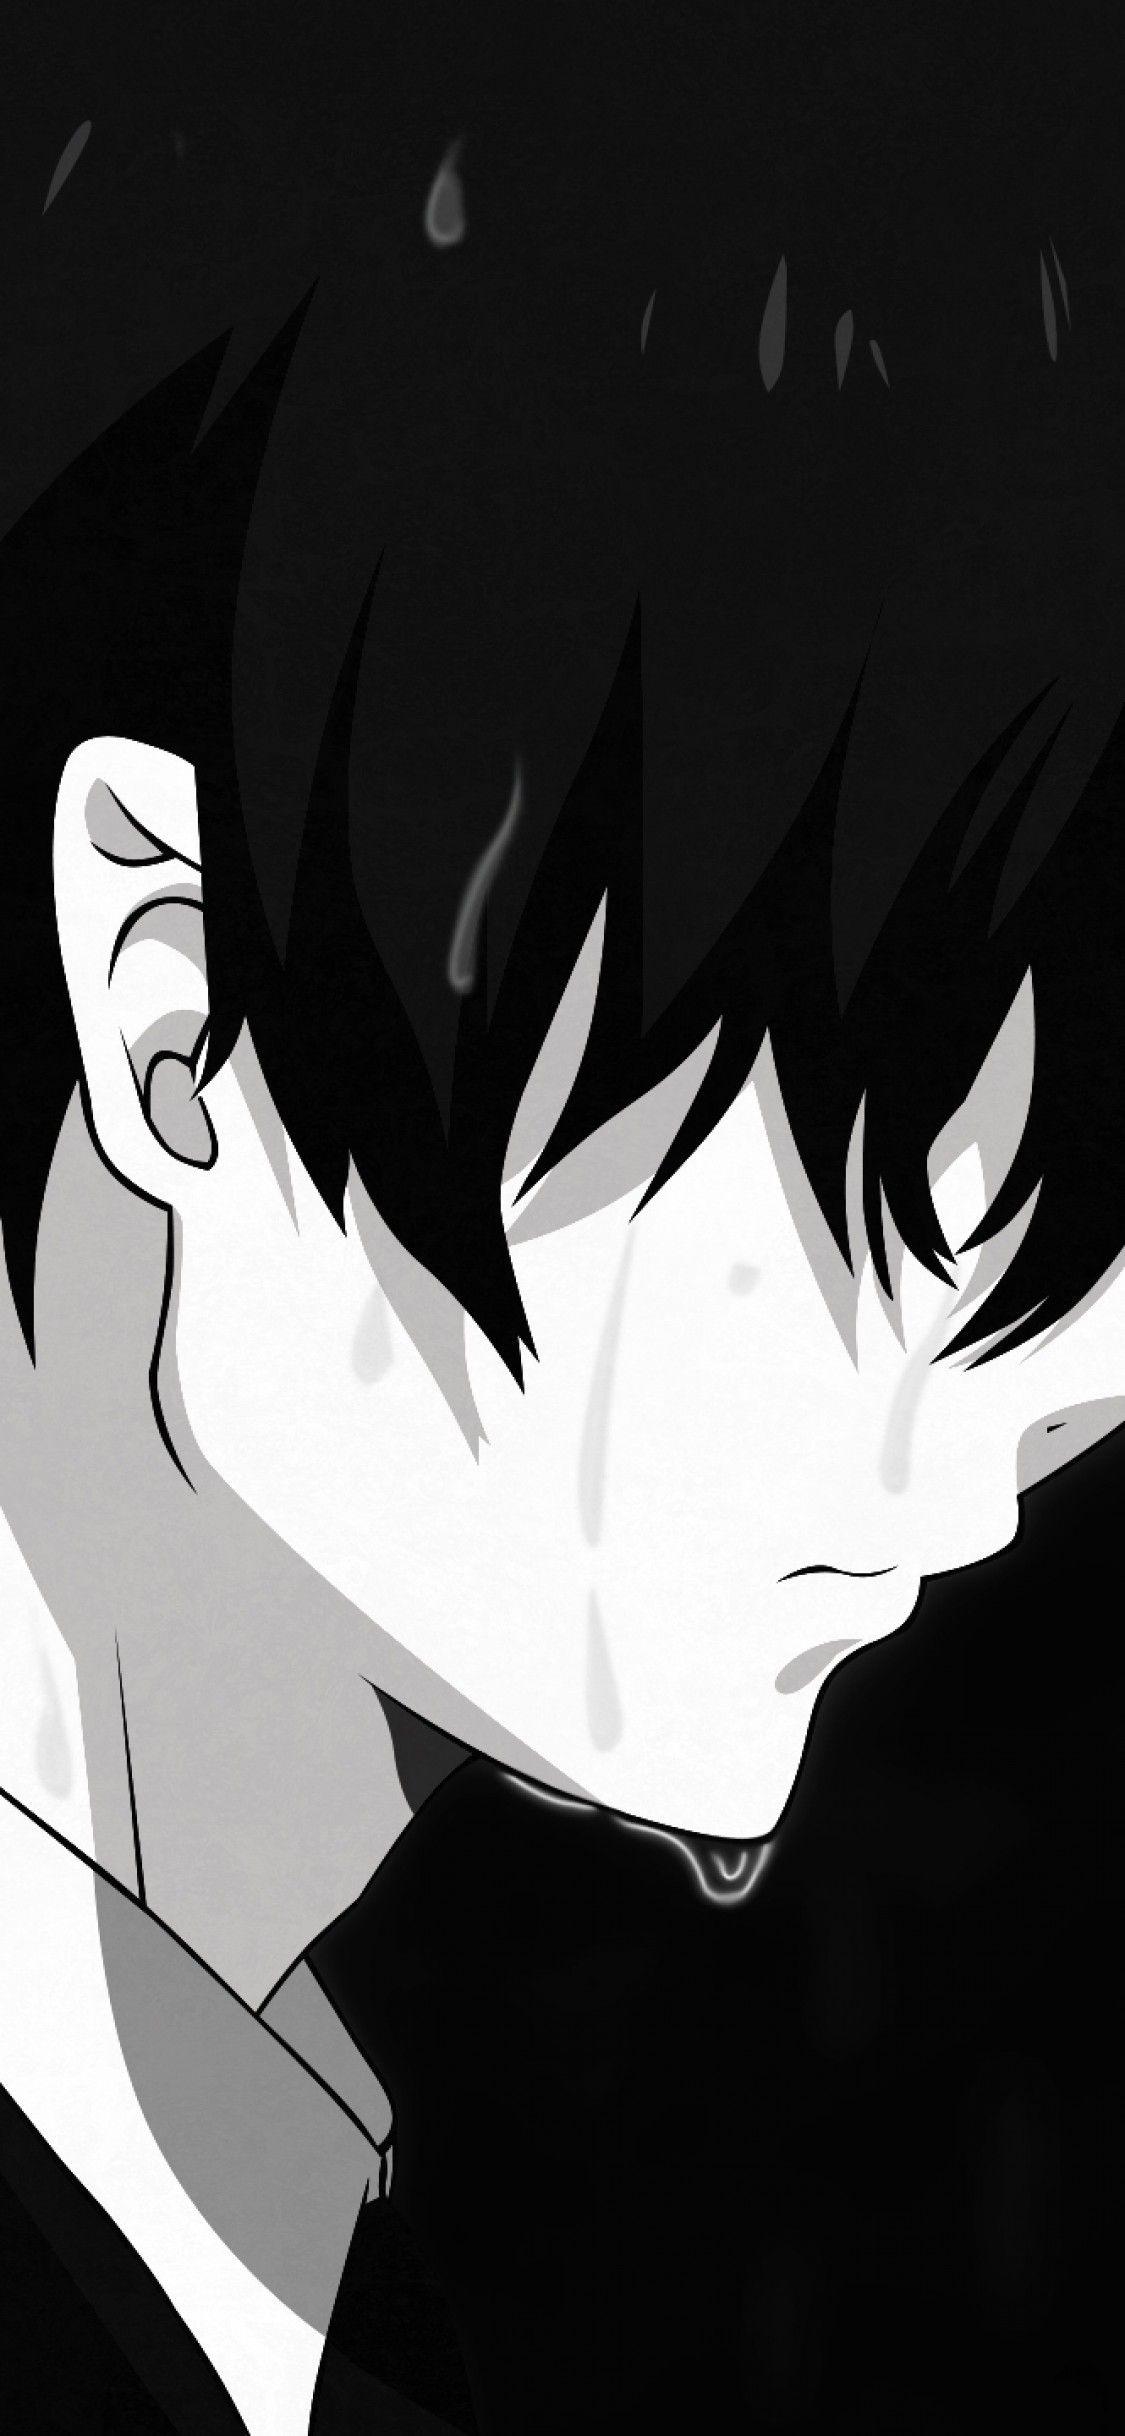 Anime Black and White iPhone Wallpaper Free Anime Black and White iPhone Background